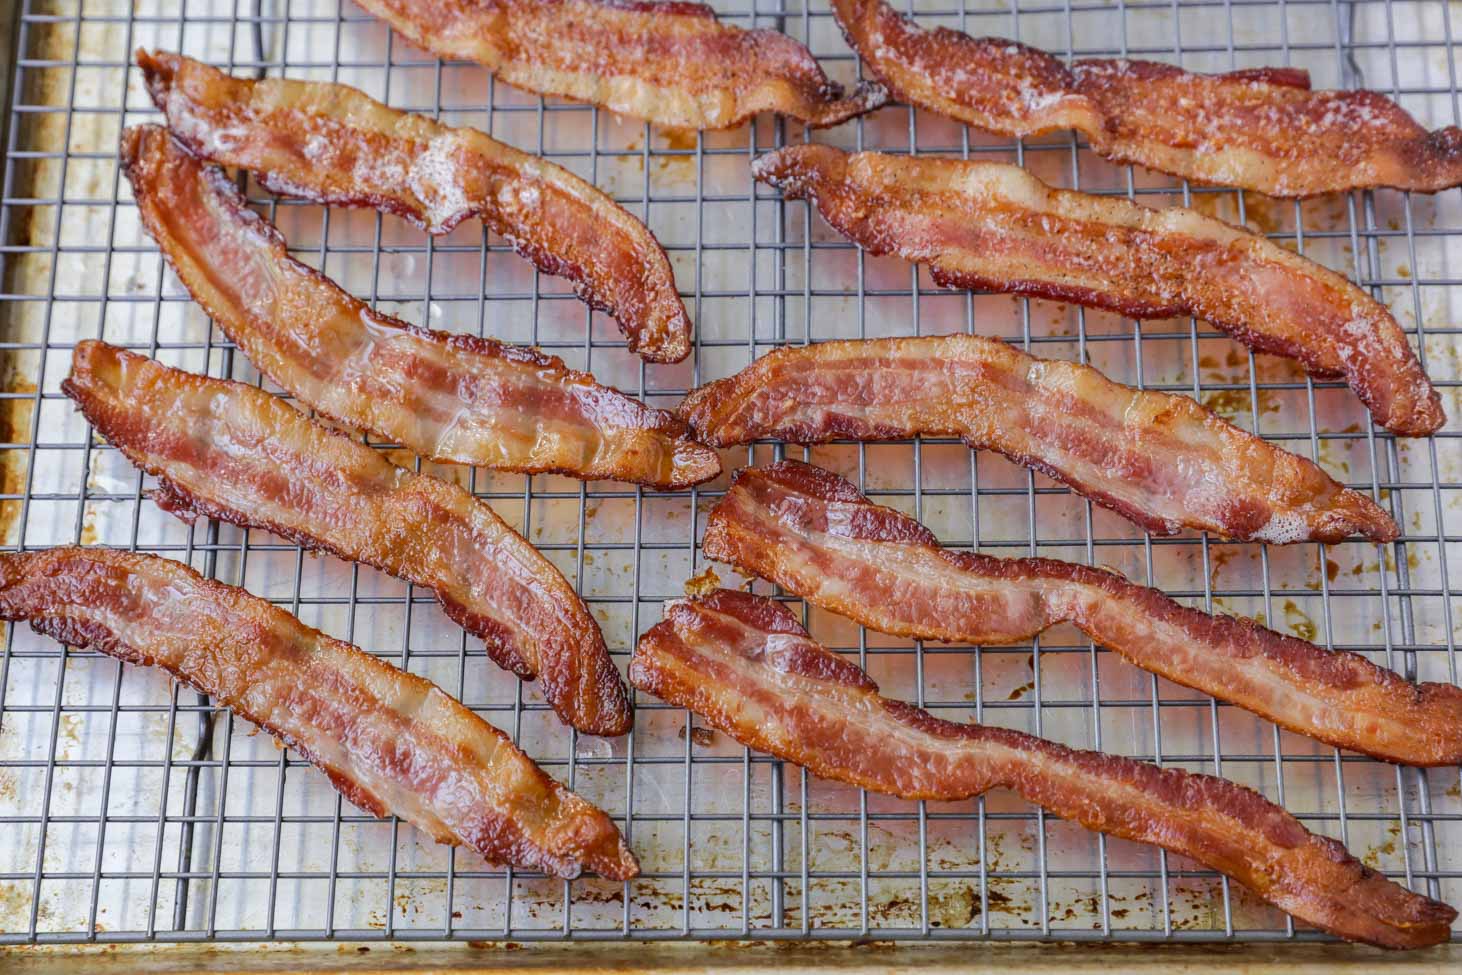 Bacon cooking on a wire rack.